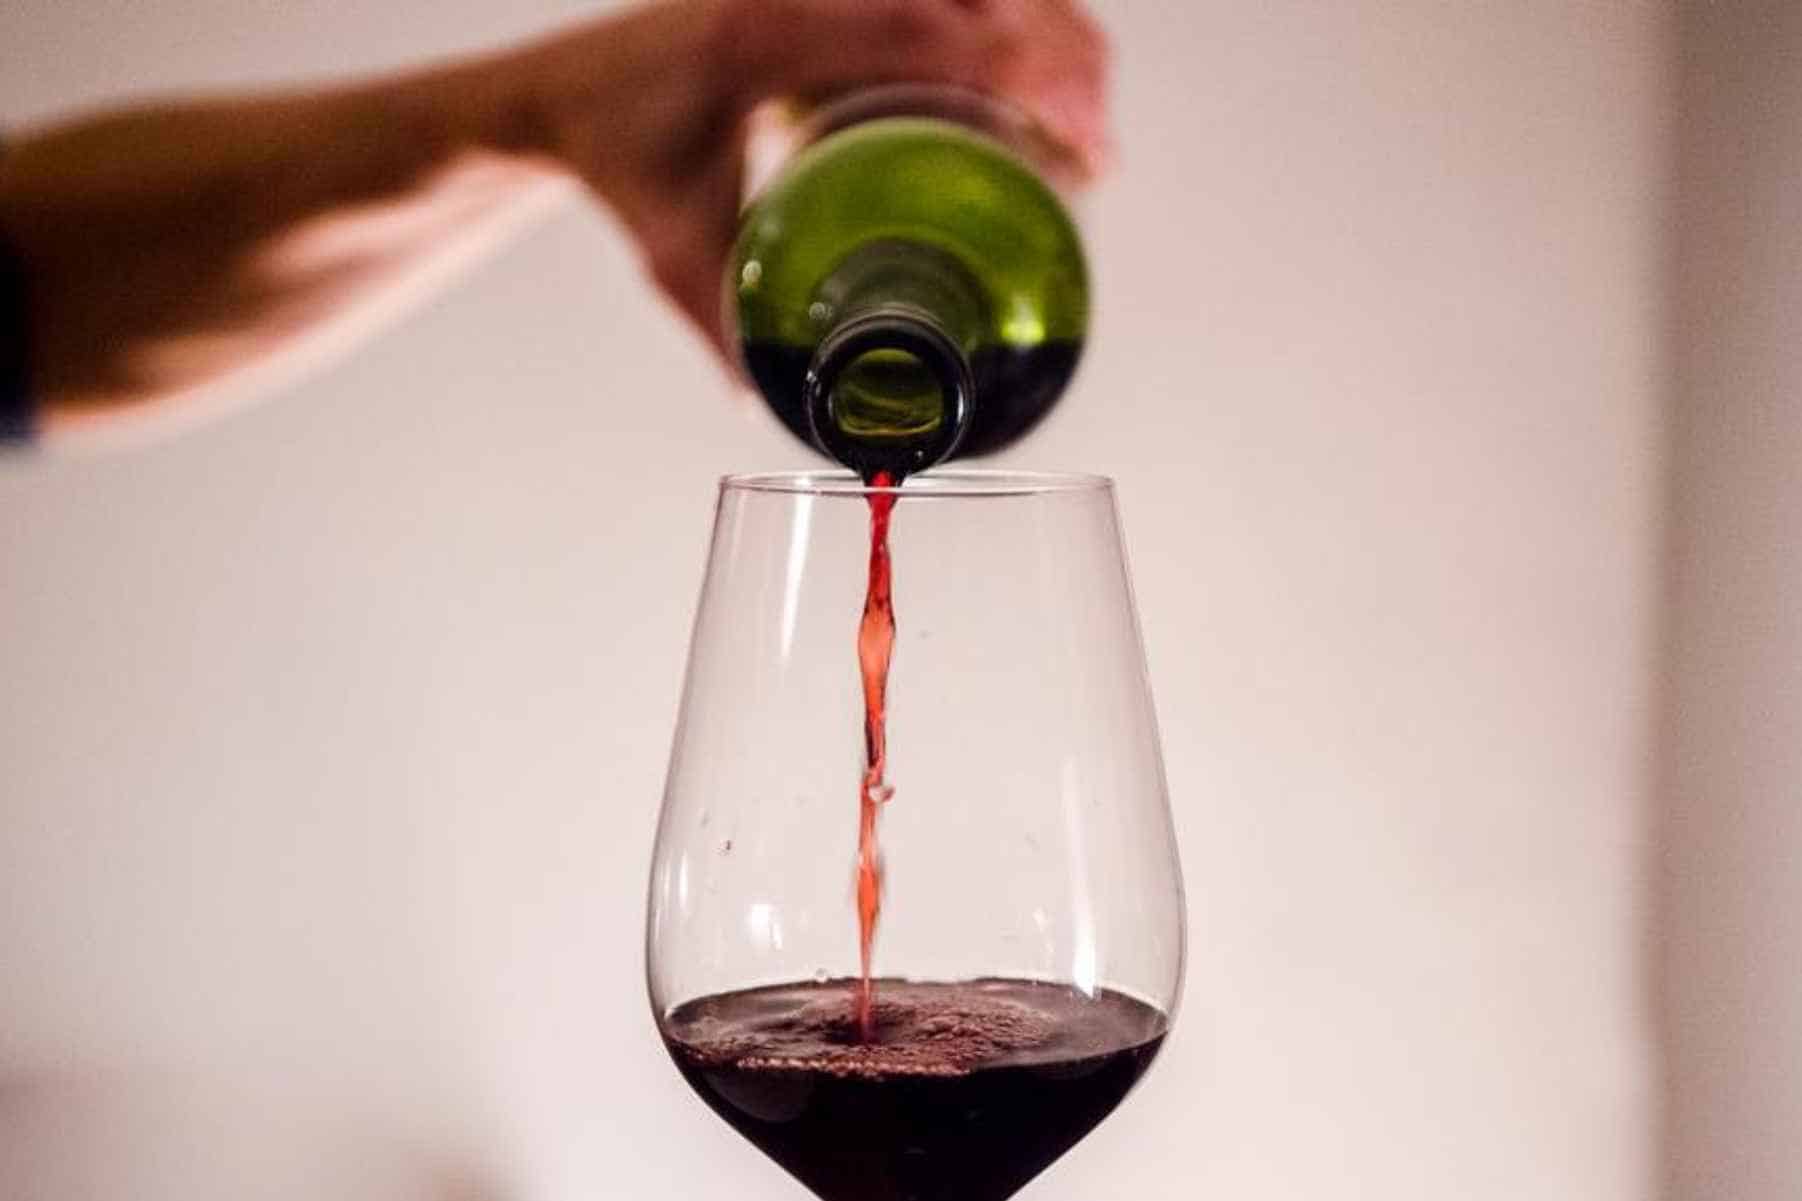 Physical Signs That Your Wine is Bad